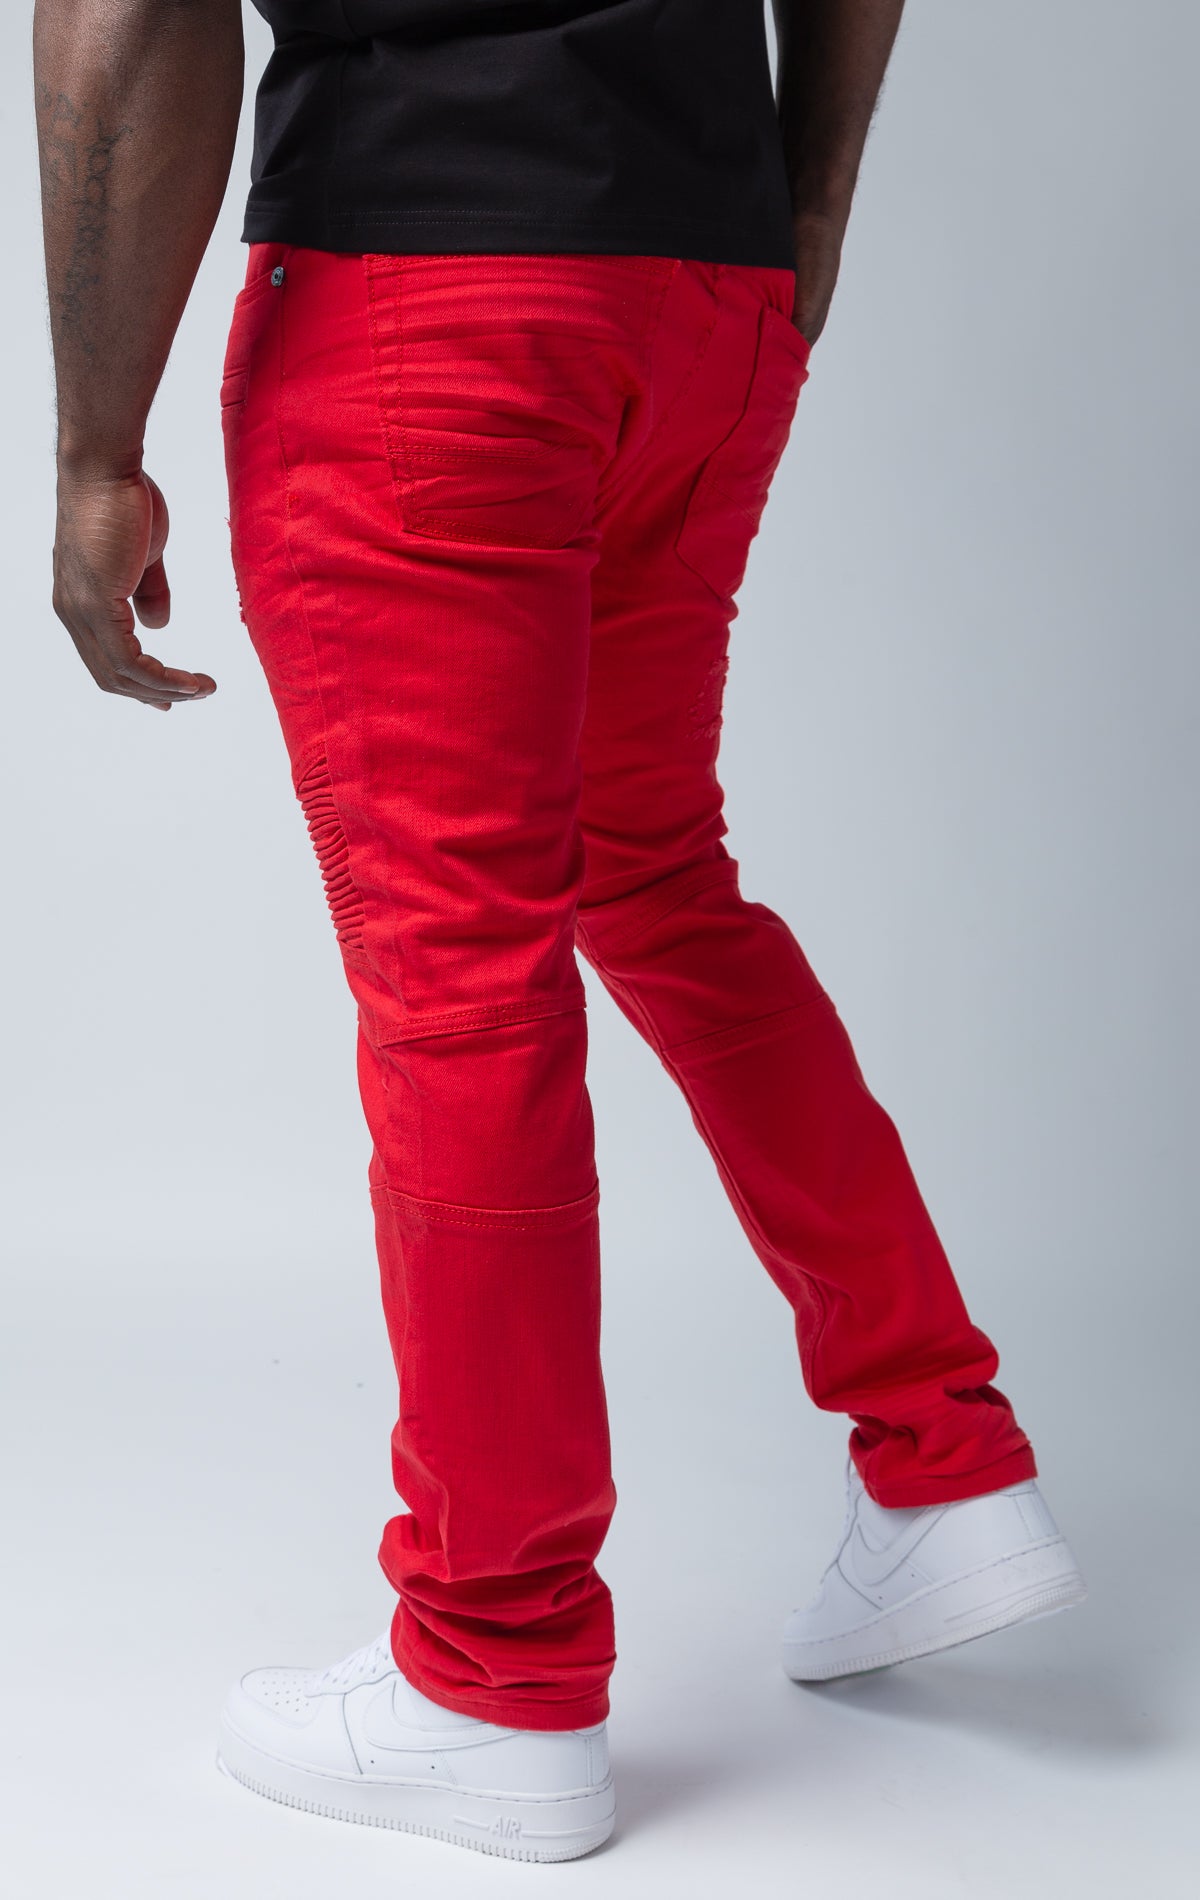 Red high-quality denim made from 98% cotton and 2% spandex. With its rip and repair design and slim fit, it's the ultimate blend of style and comfort.